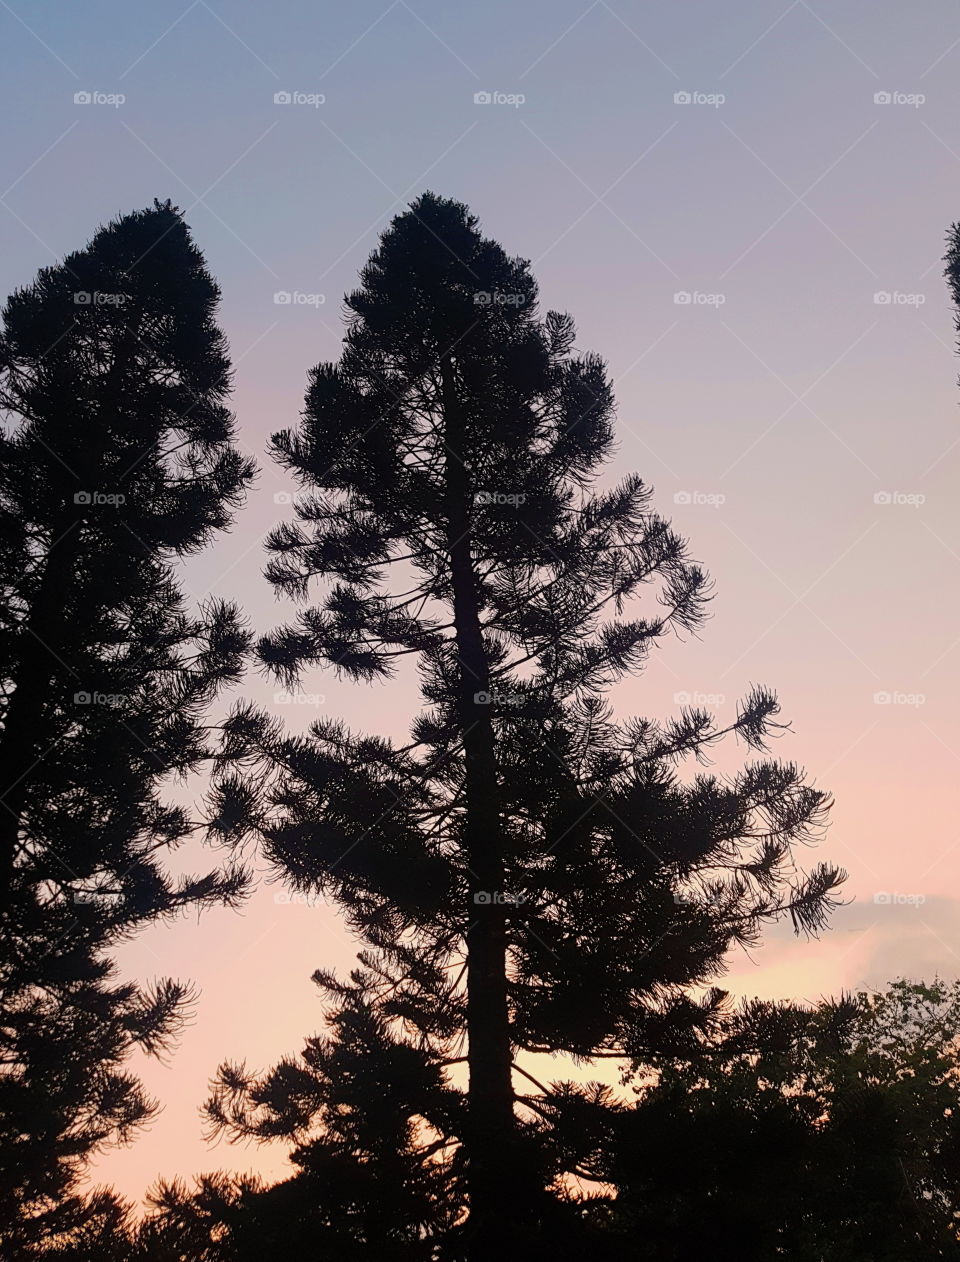 I took this photo because of how noticeably gorgeous the sky was and the silhouette of the trees blended well with it.